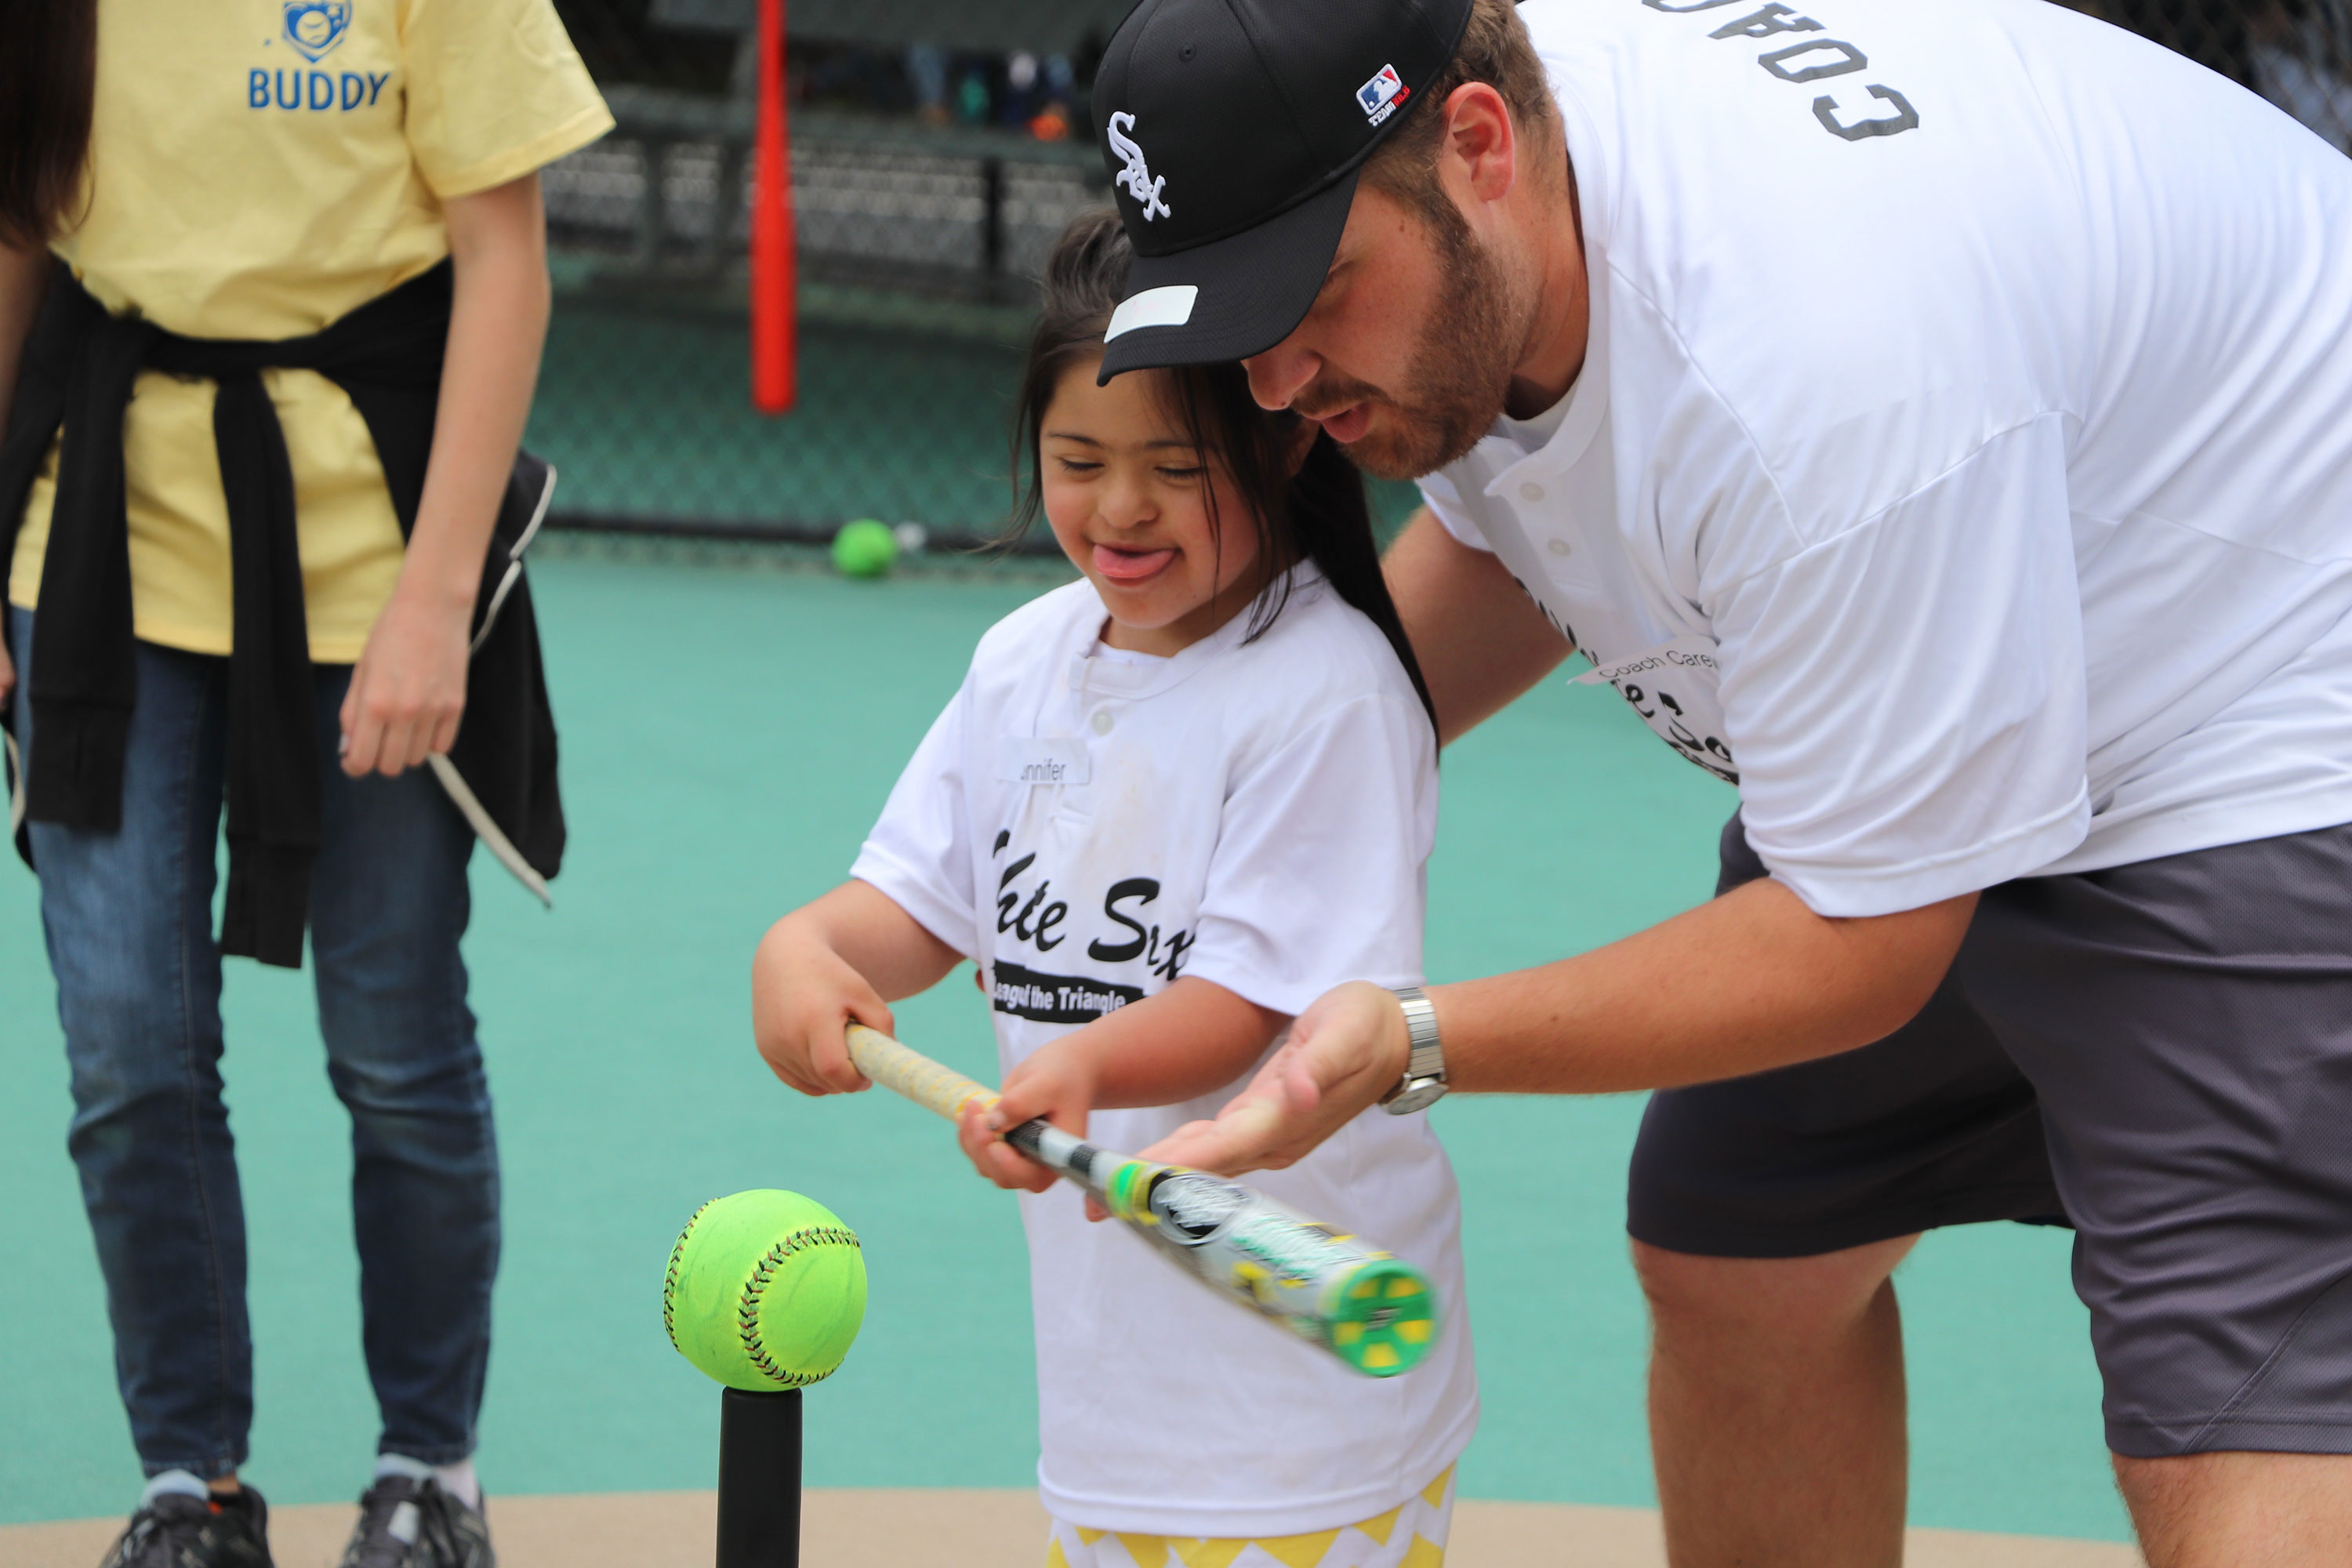 man showing young girl how to hit a t-ball